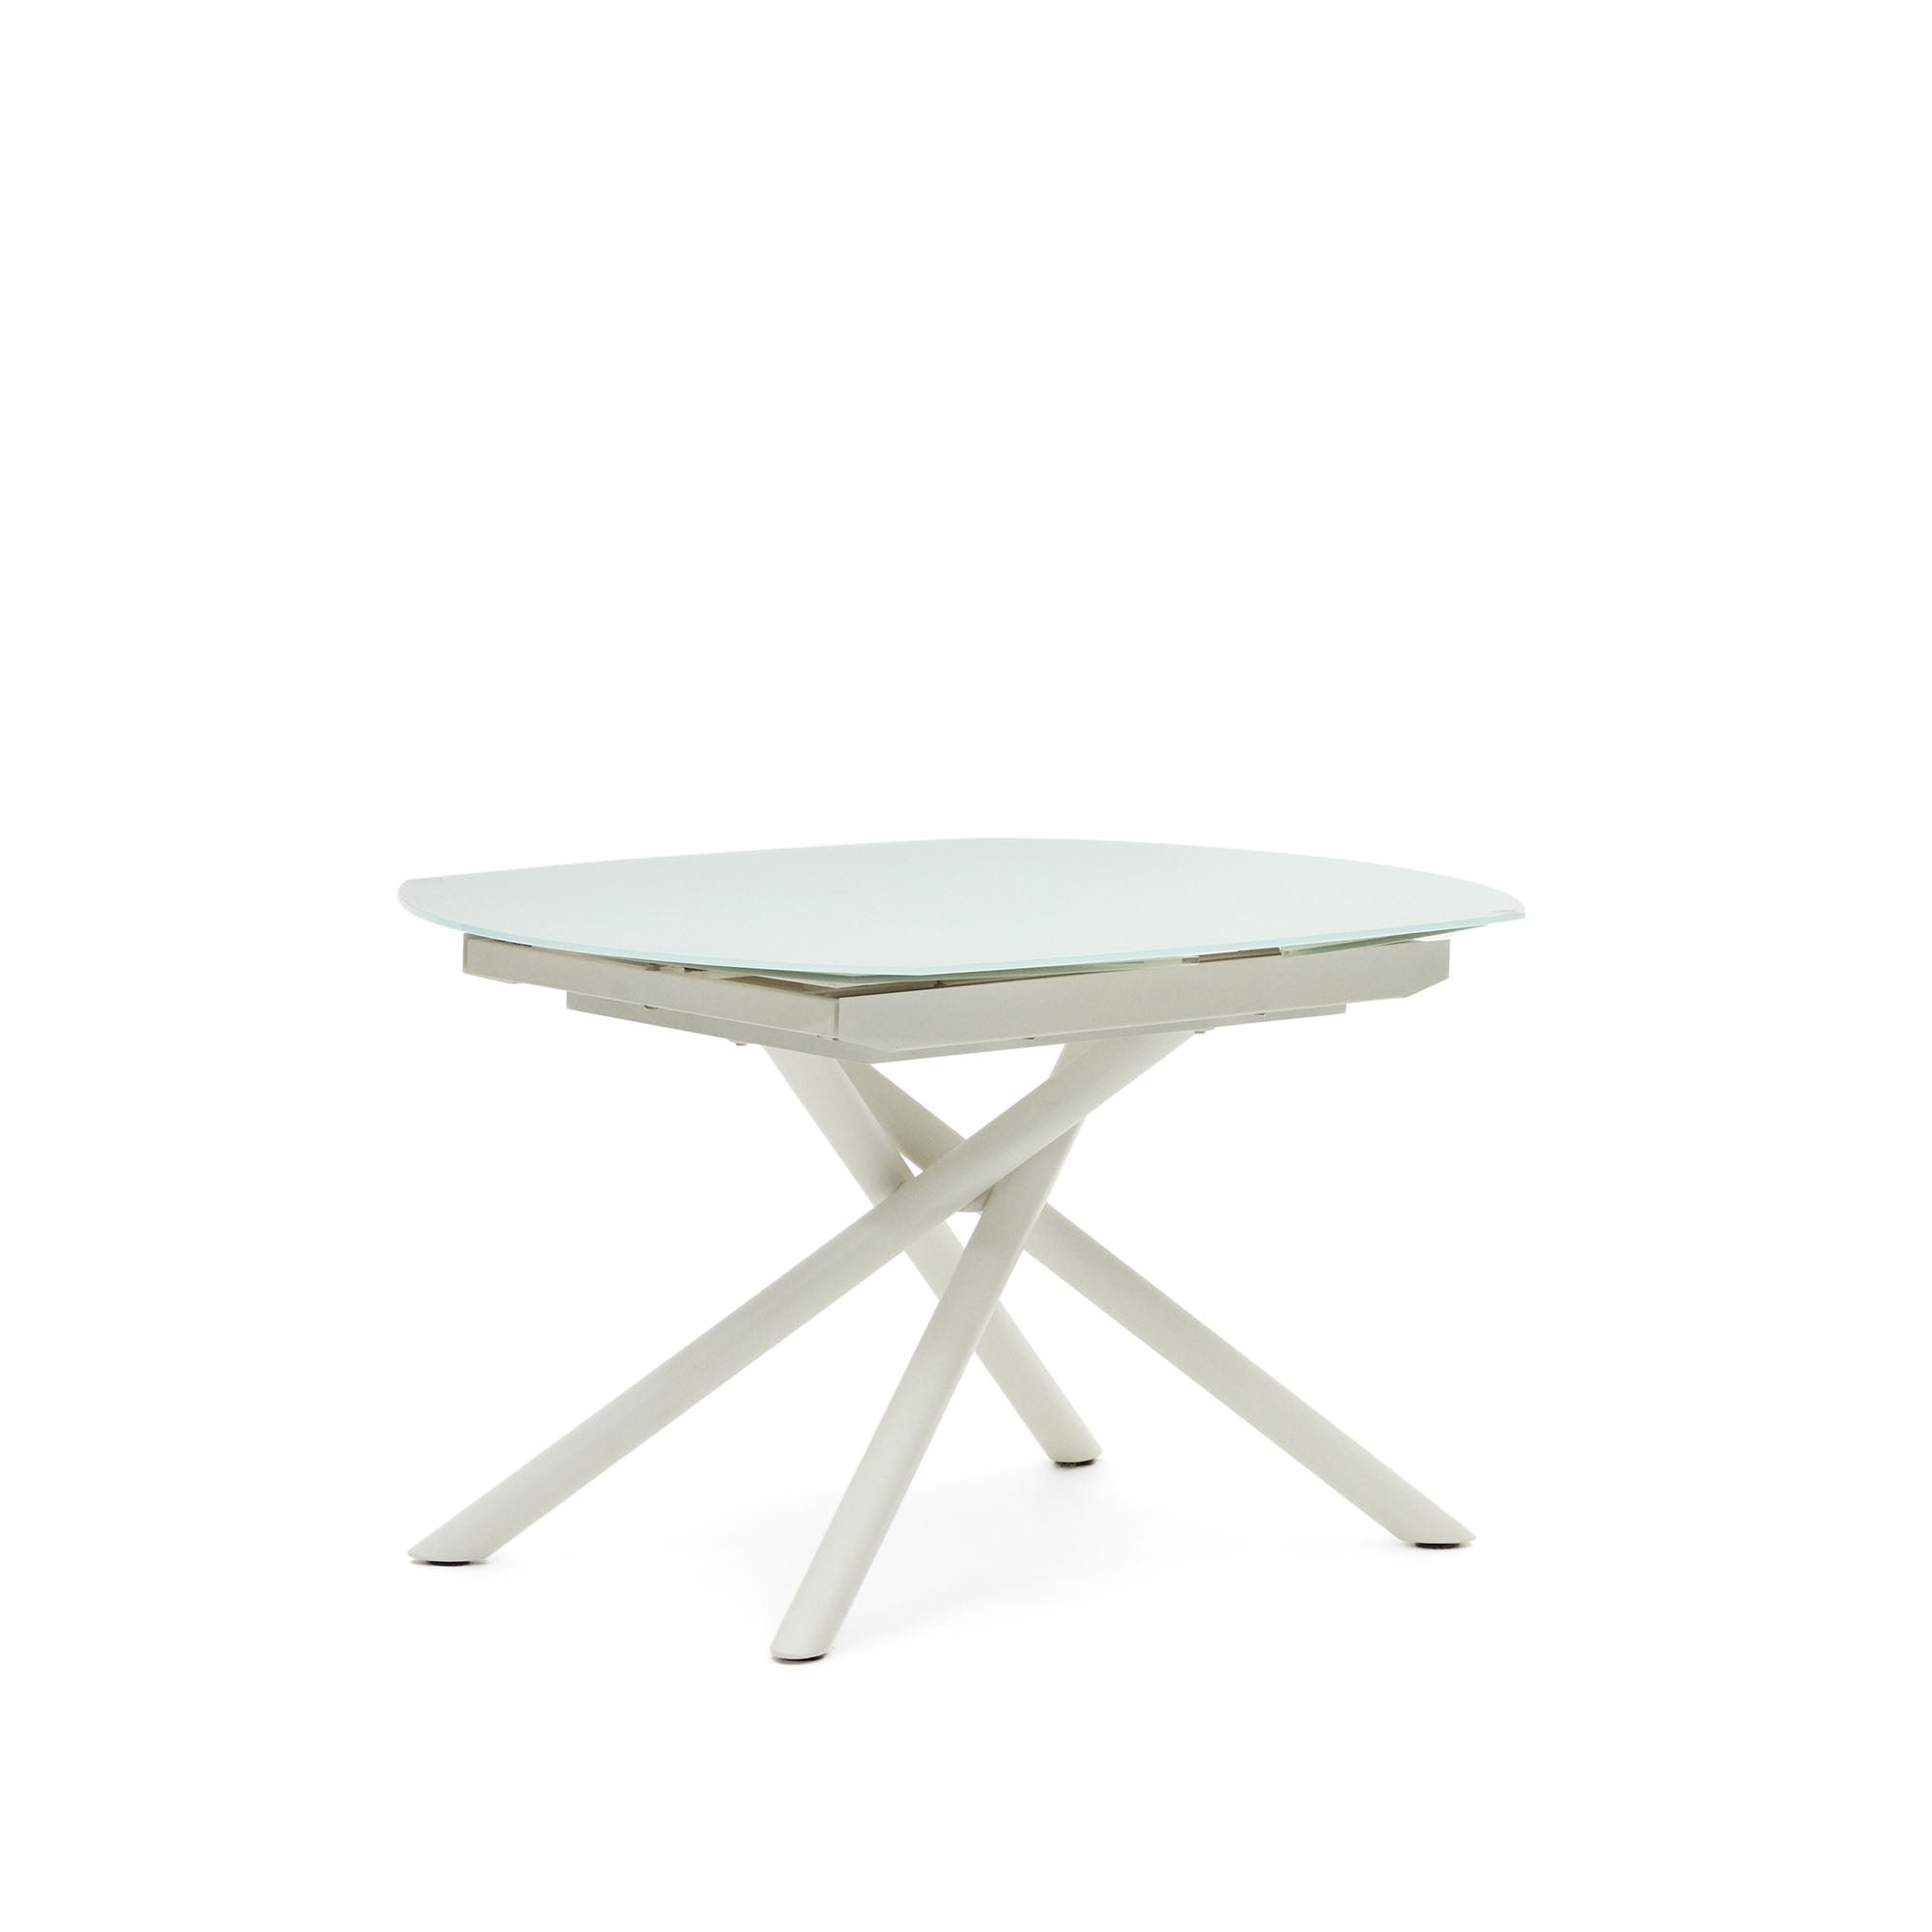 Vashti extendable round table in glass and MDF with steel legs in white, 130(190) x 100 cm